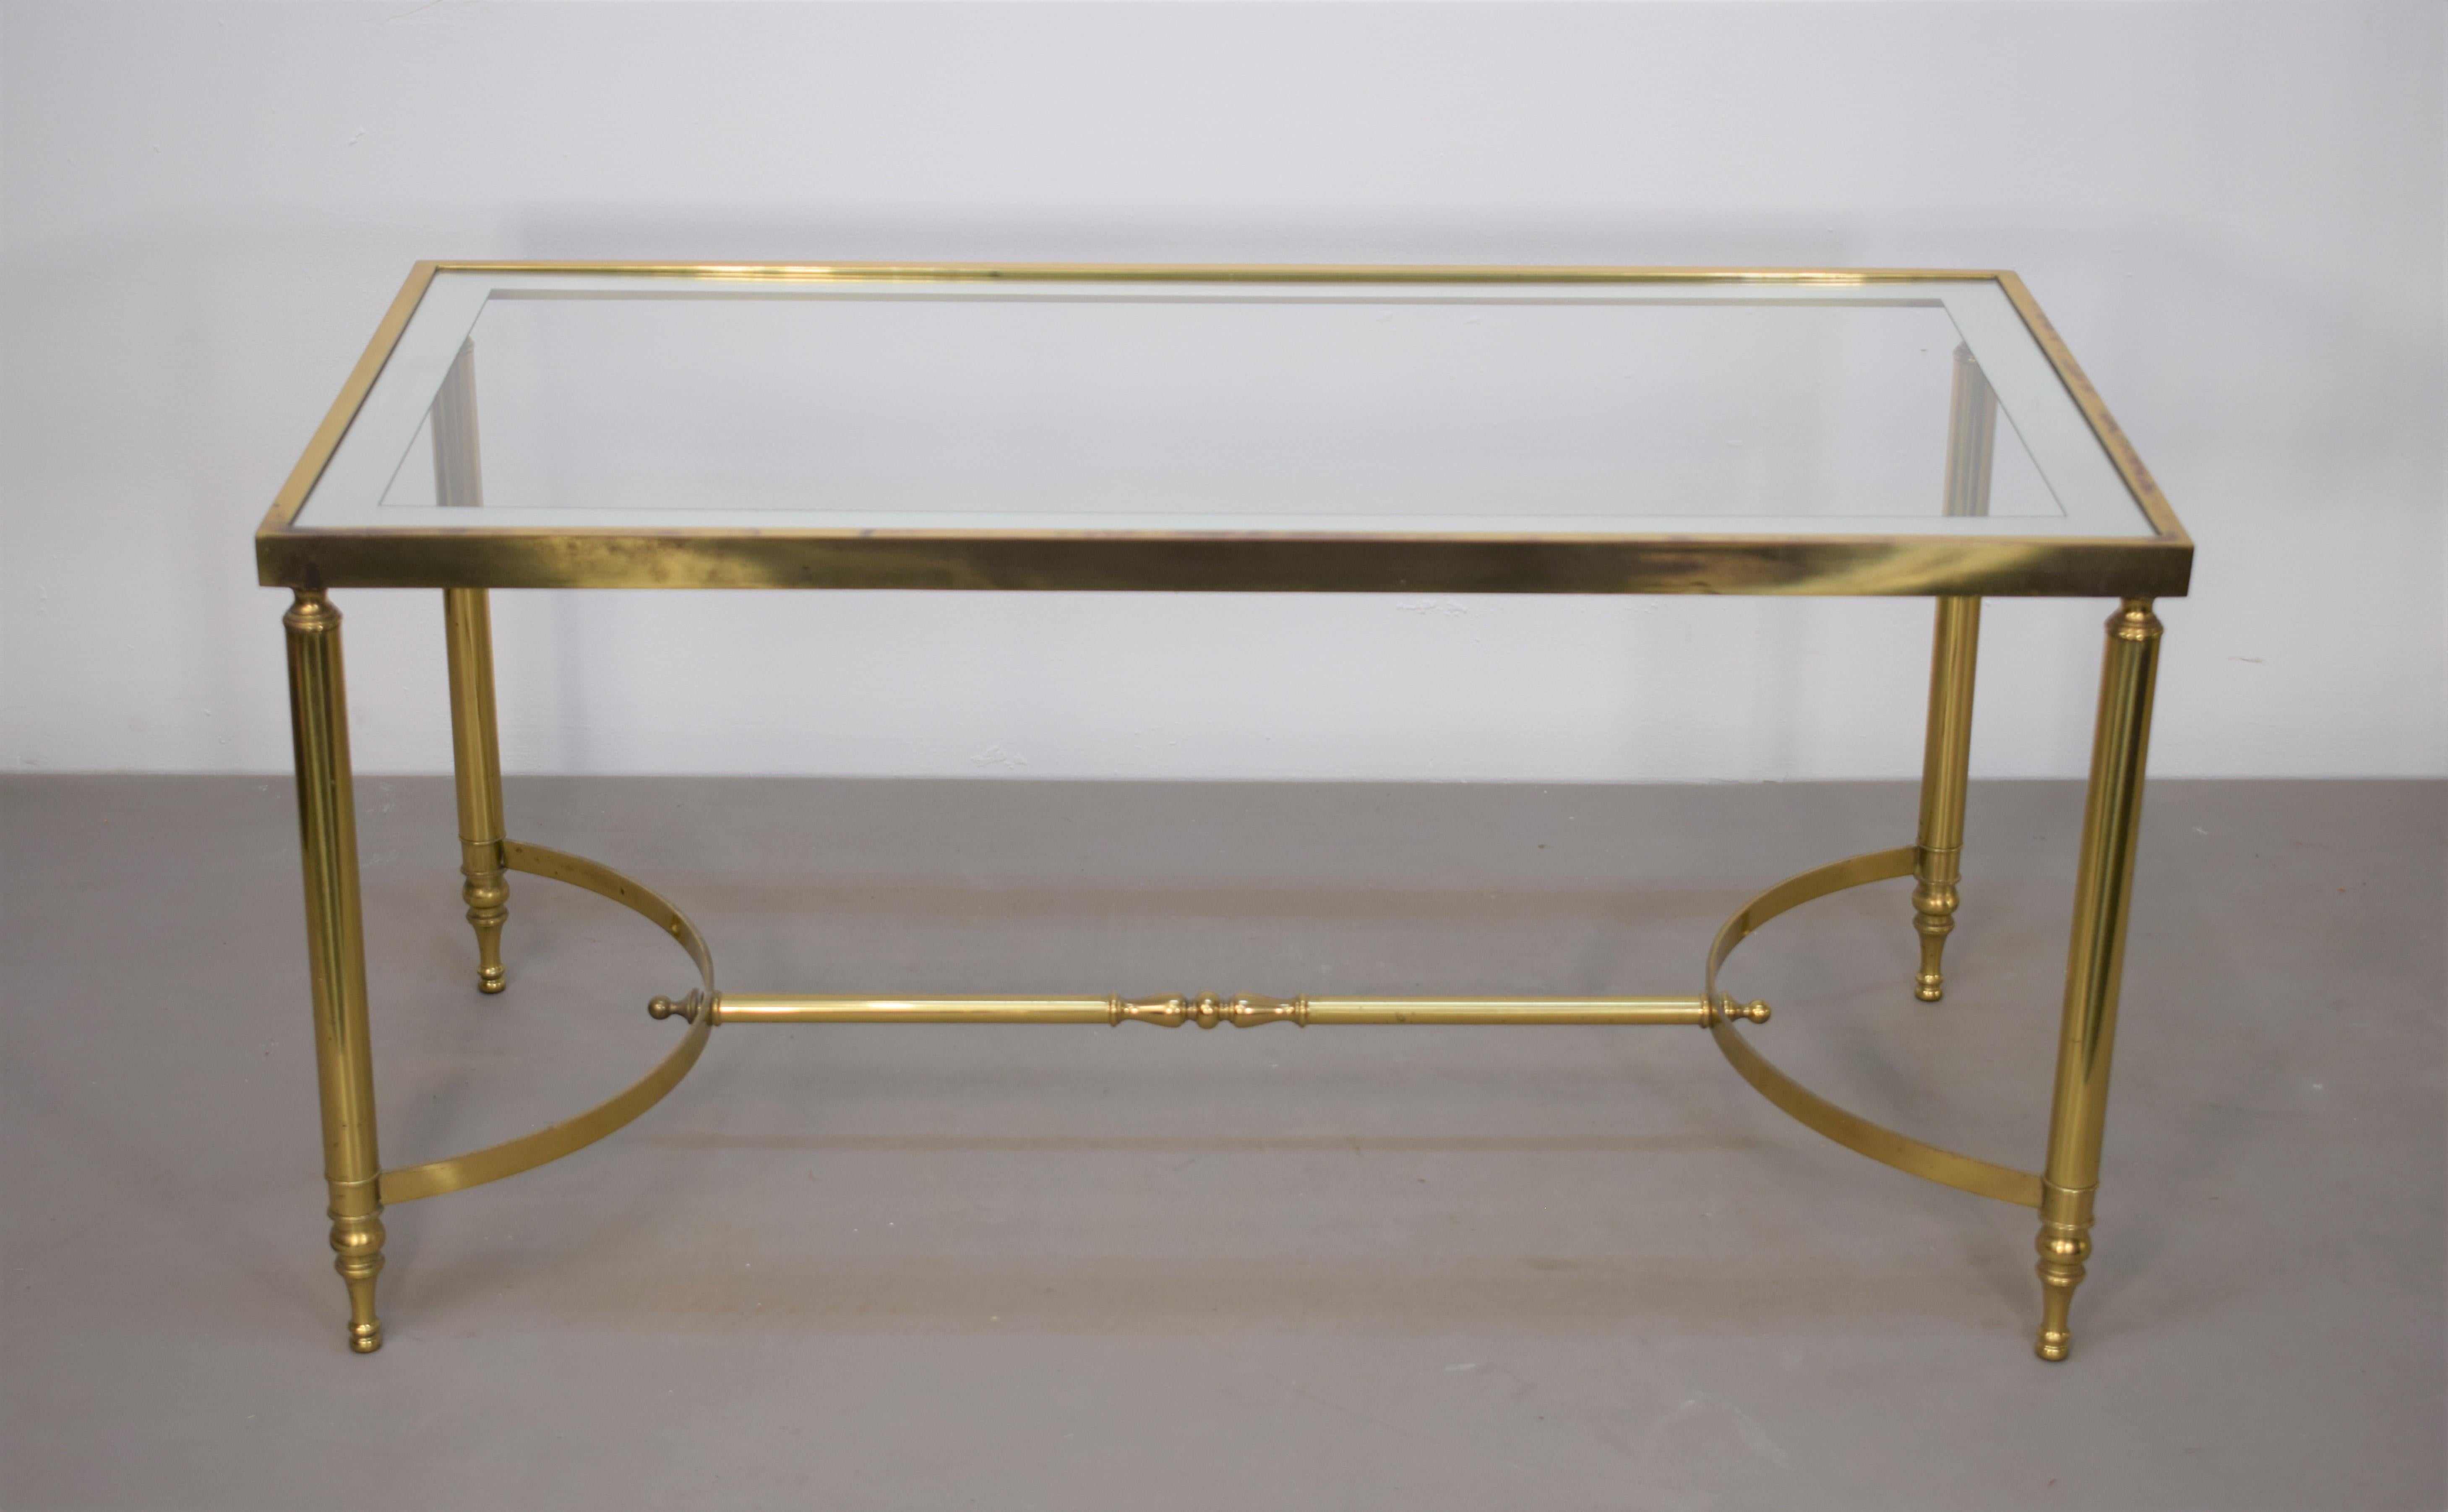 Italian coffee table, brass and glass, 1960s.

Dimensions: H= 50 cm; W= 100 cm; D= 51 cm.